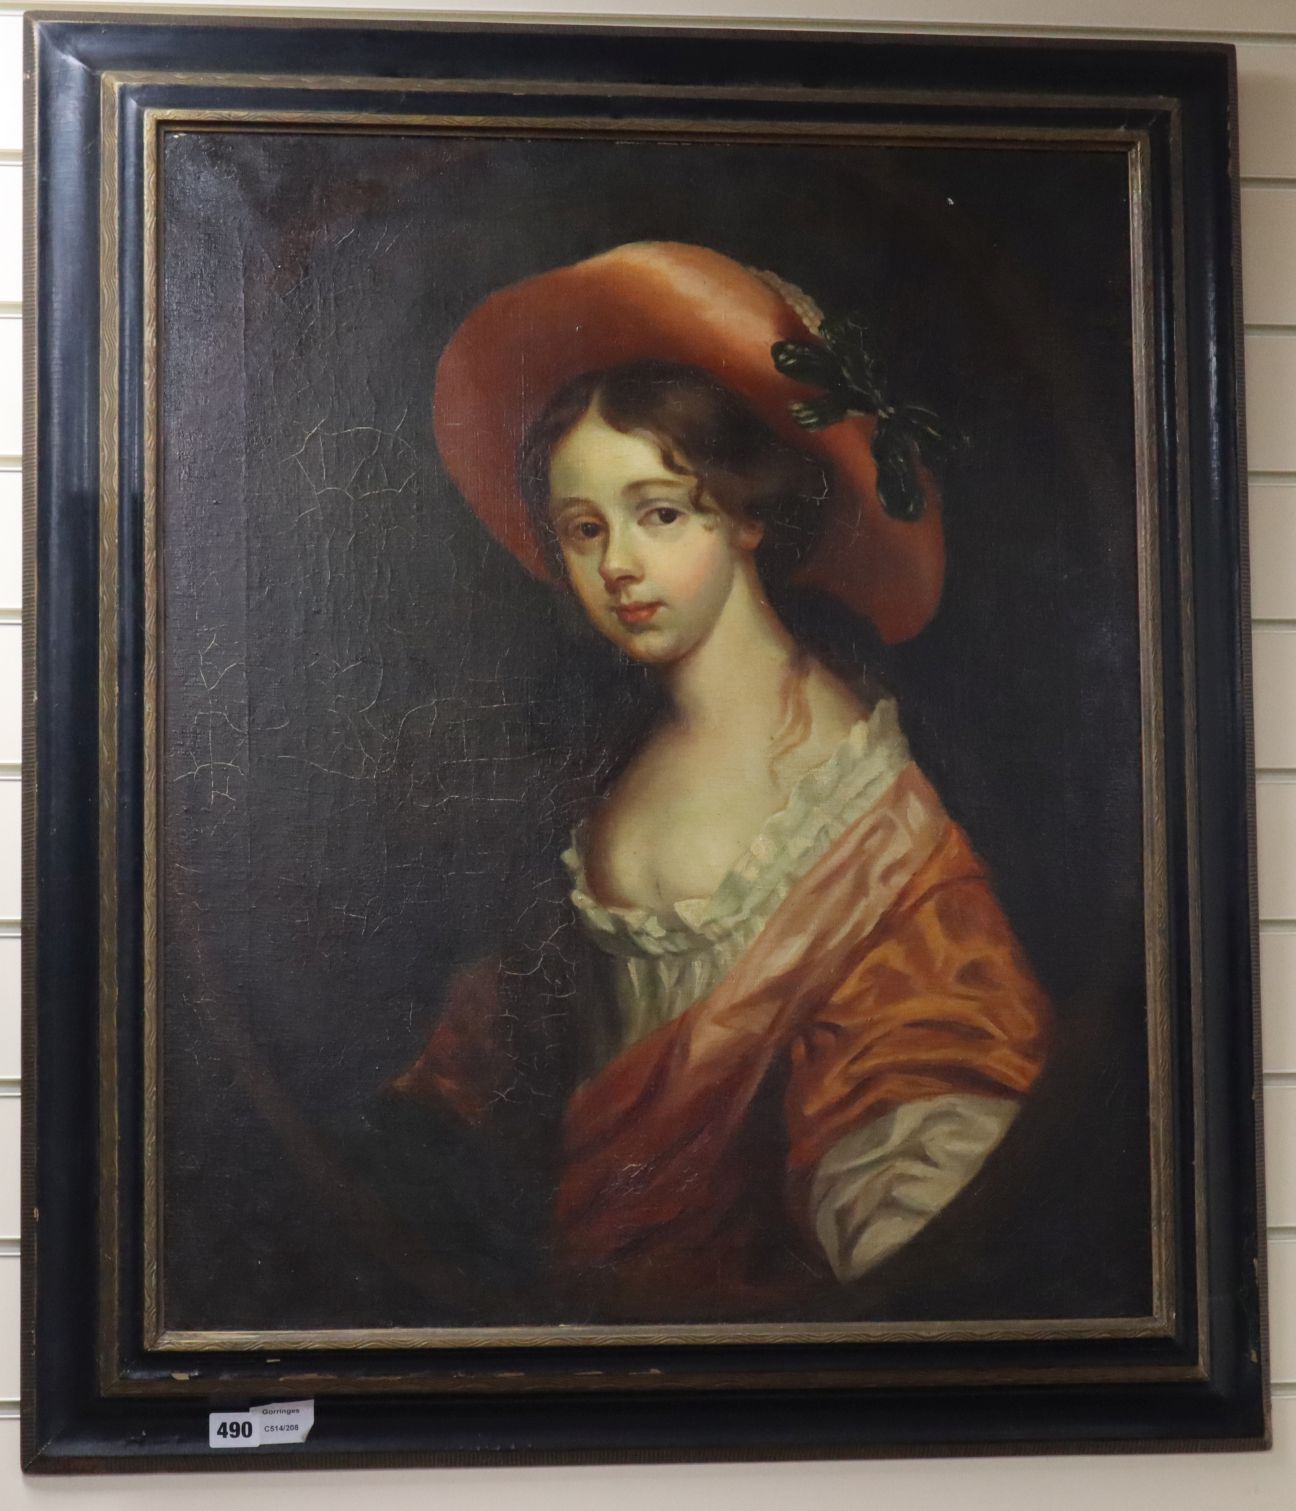 19th century English School, oil on canvas, Portrait of a young lady wearing a ribbon tied hat, 75 x